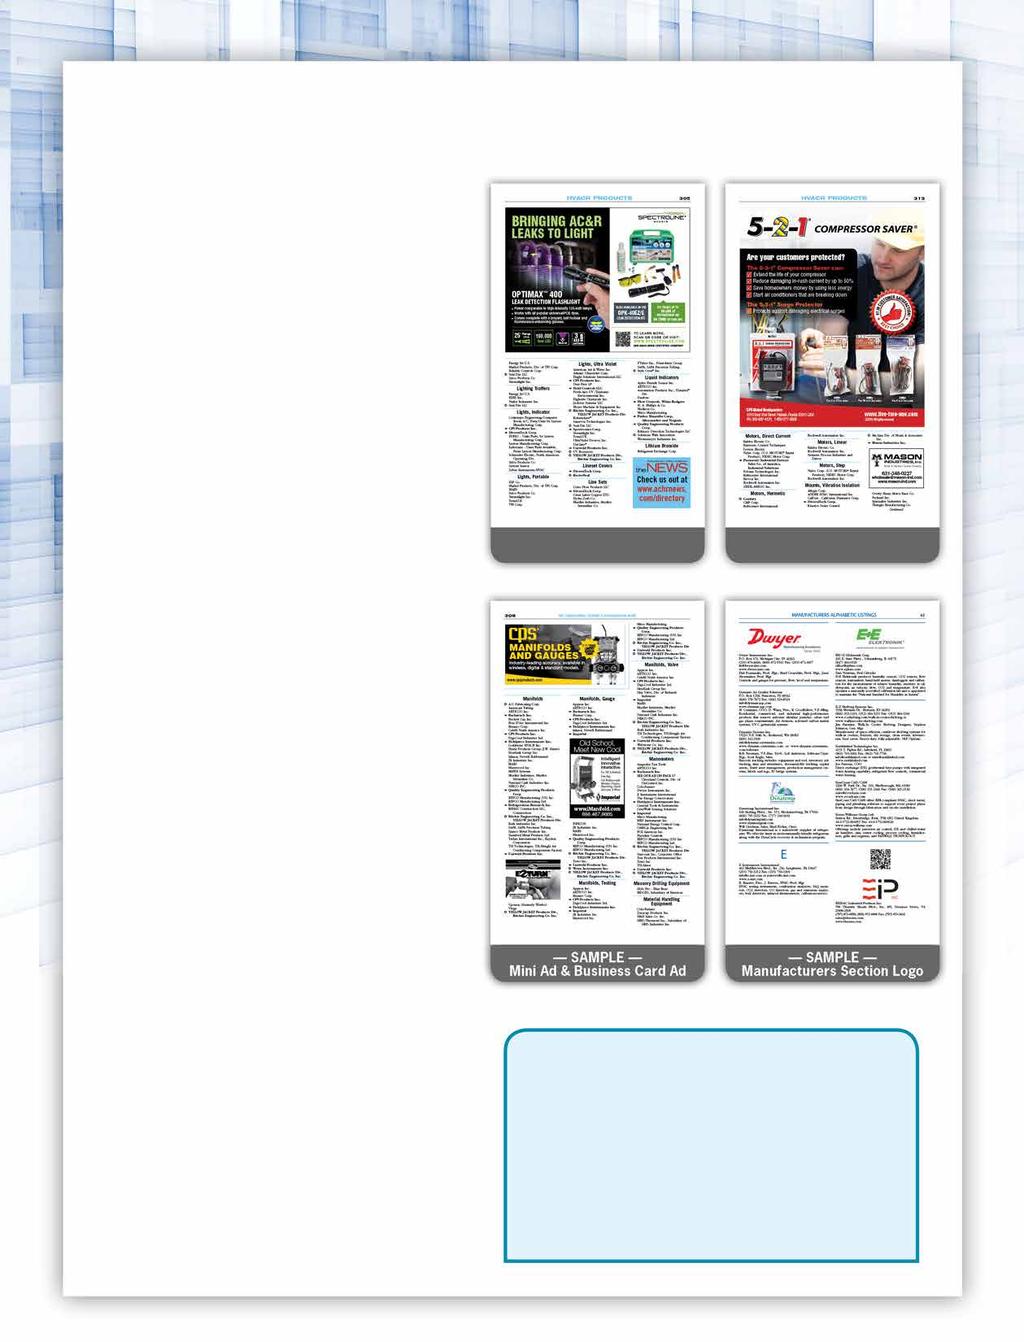 Print Opportunities Display Ads Display ads in the HVACR Directory & Source Guide are placed near the product listing of your choice.